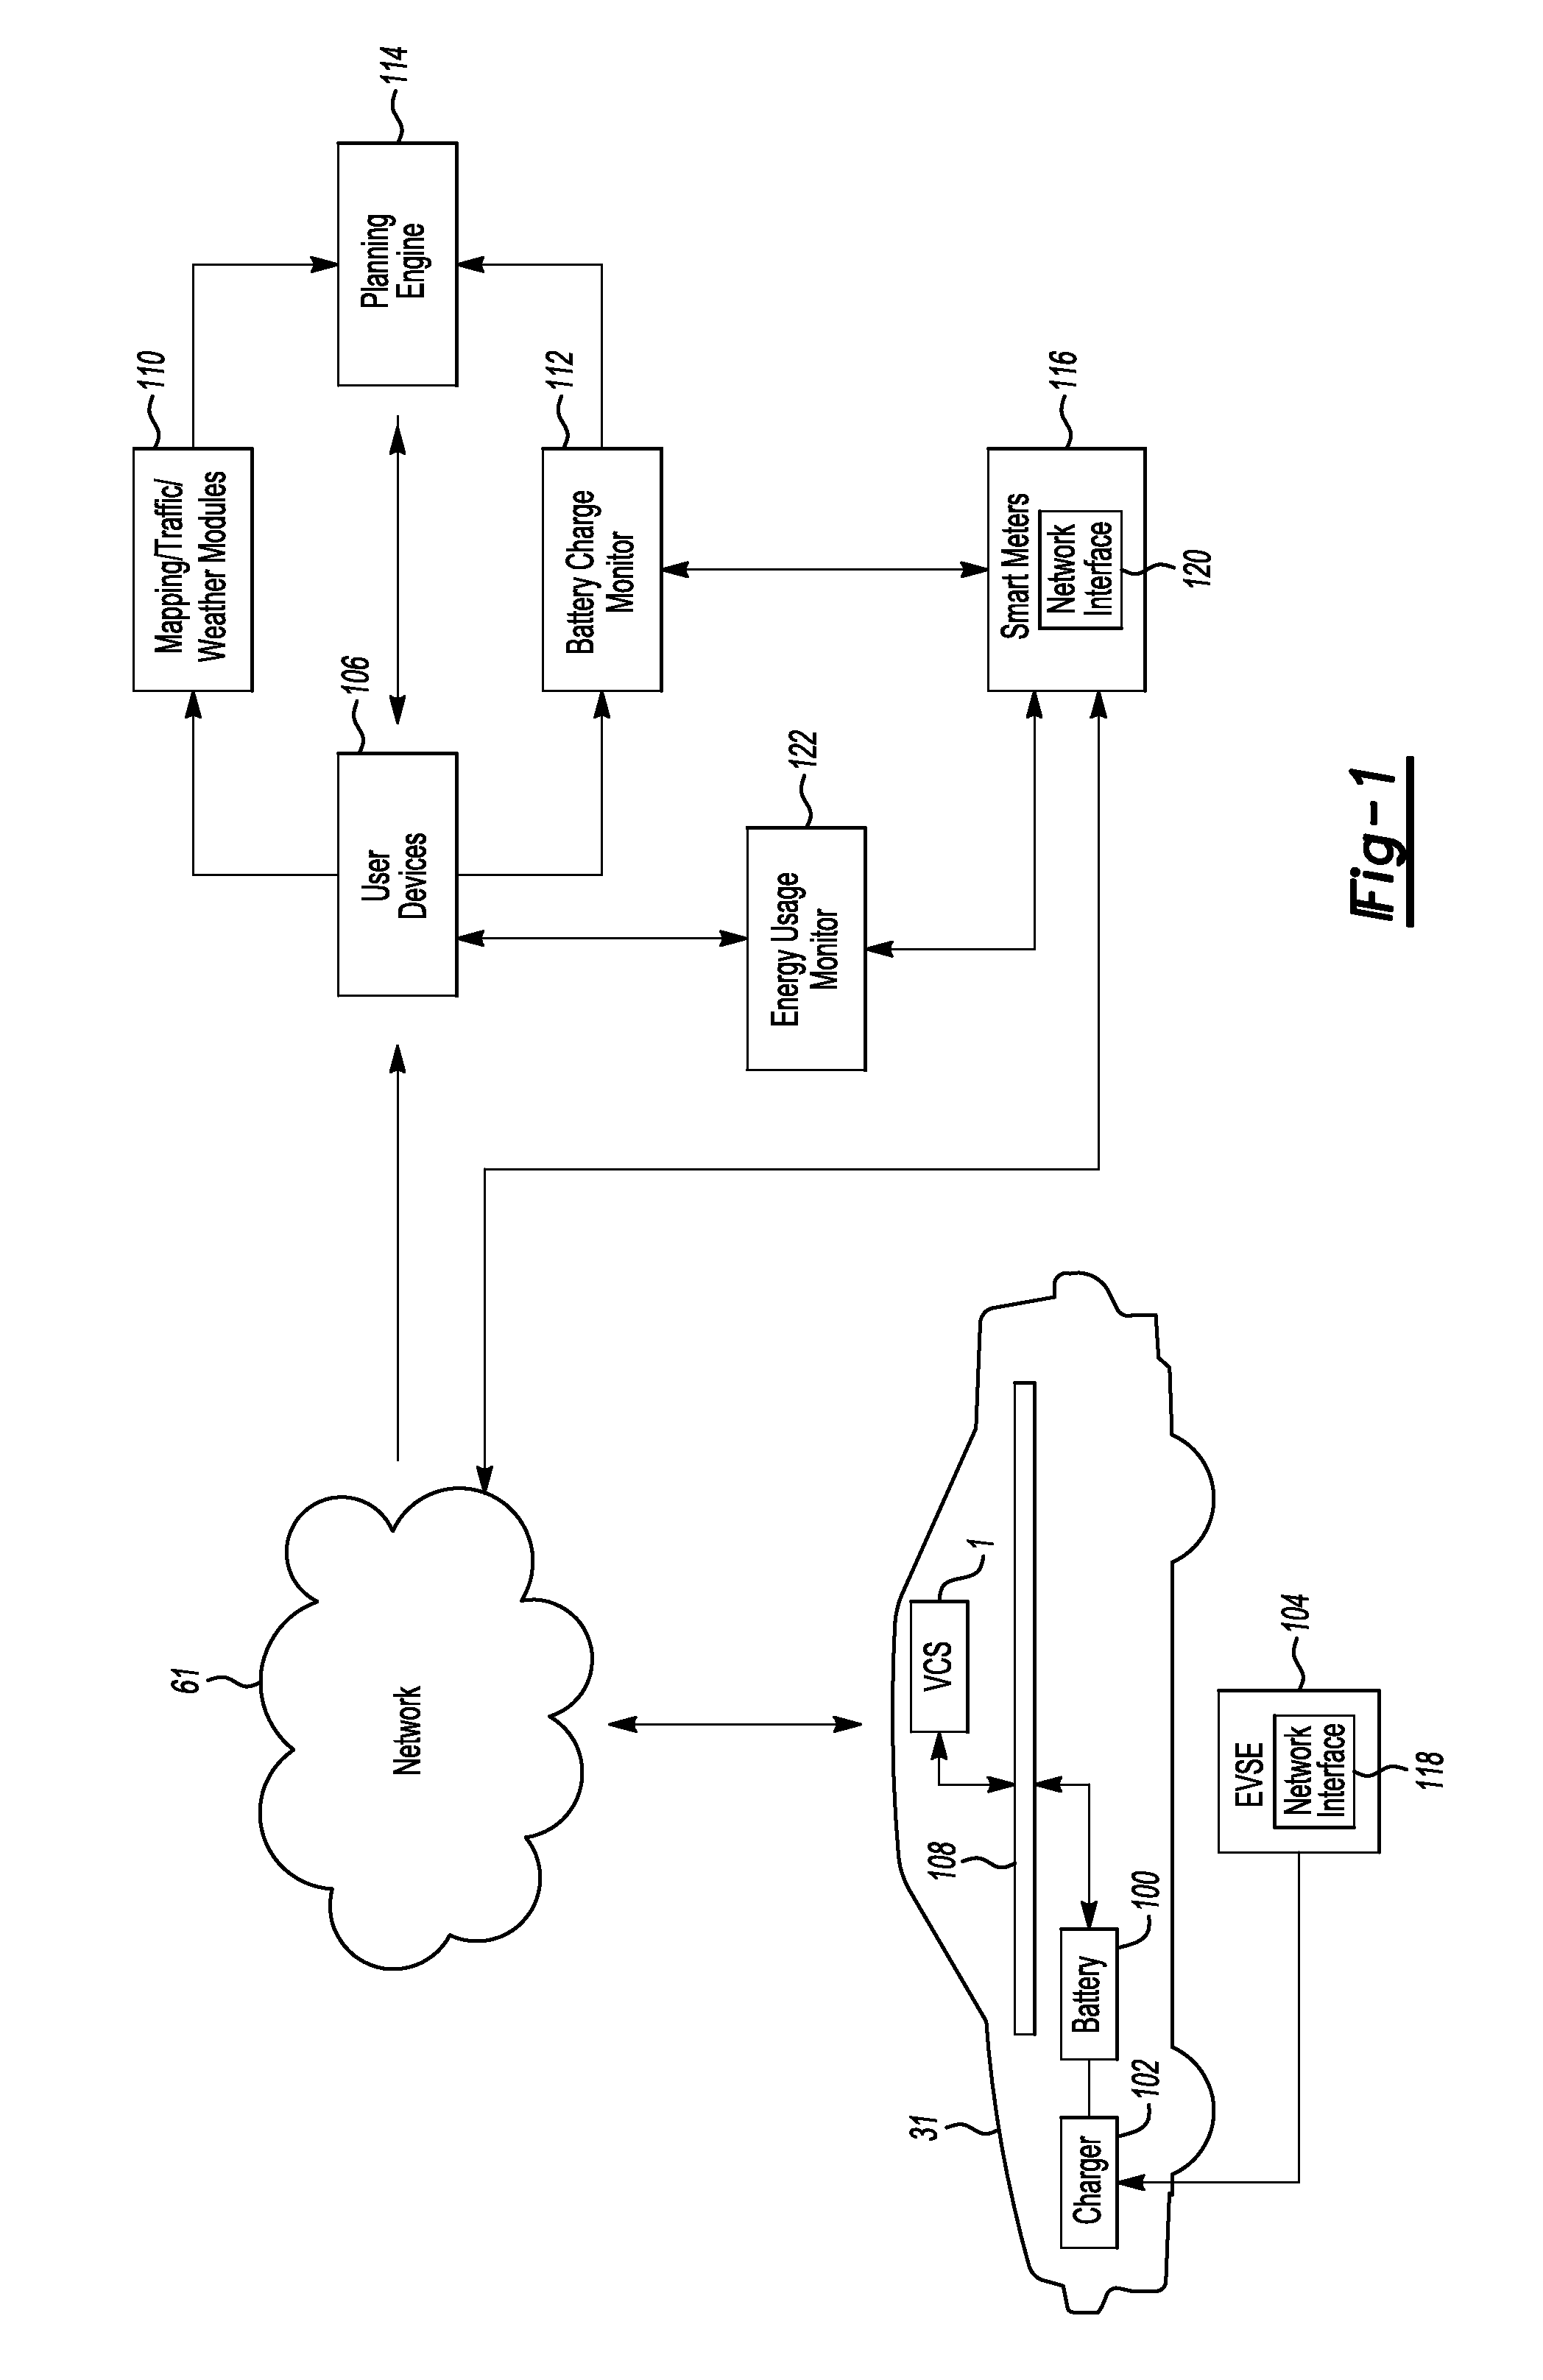 Method and system for monitoring an energy storage system for a vehicle for trip planning